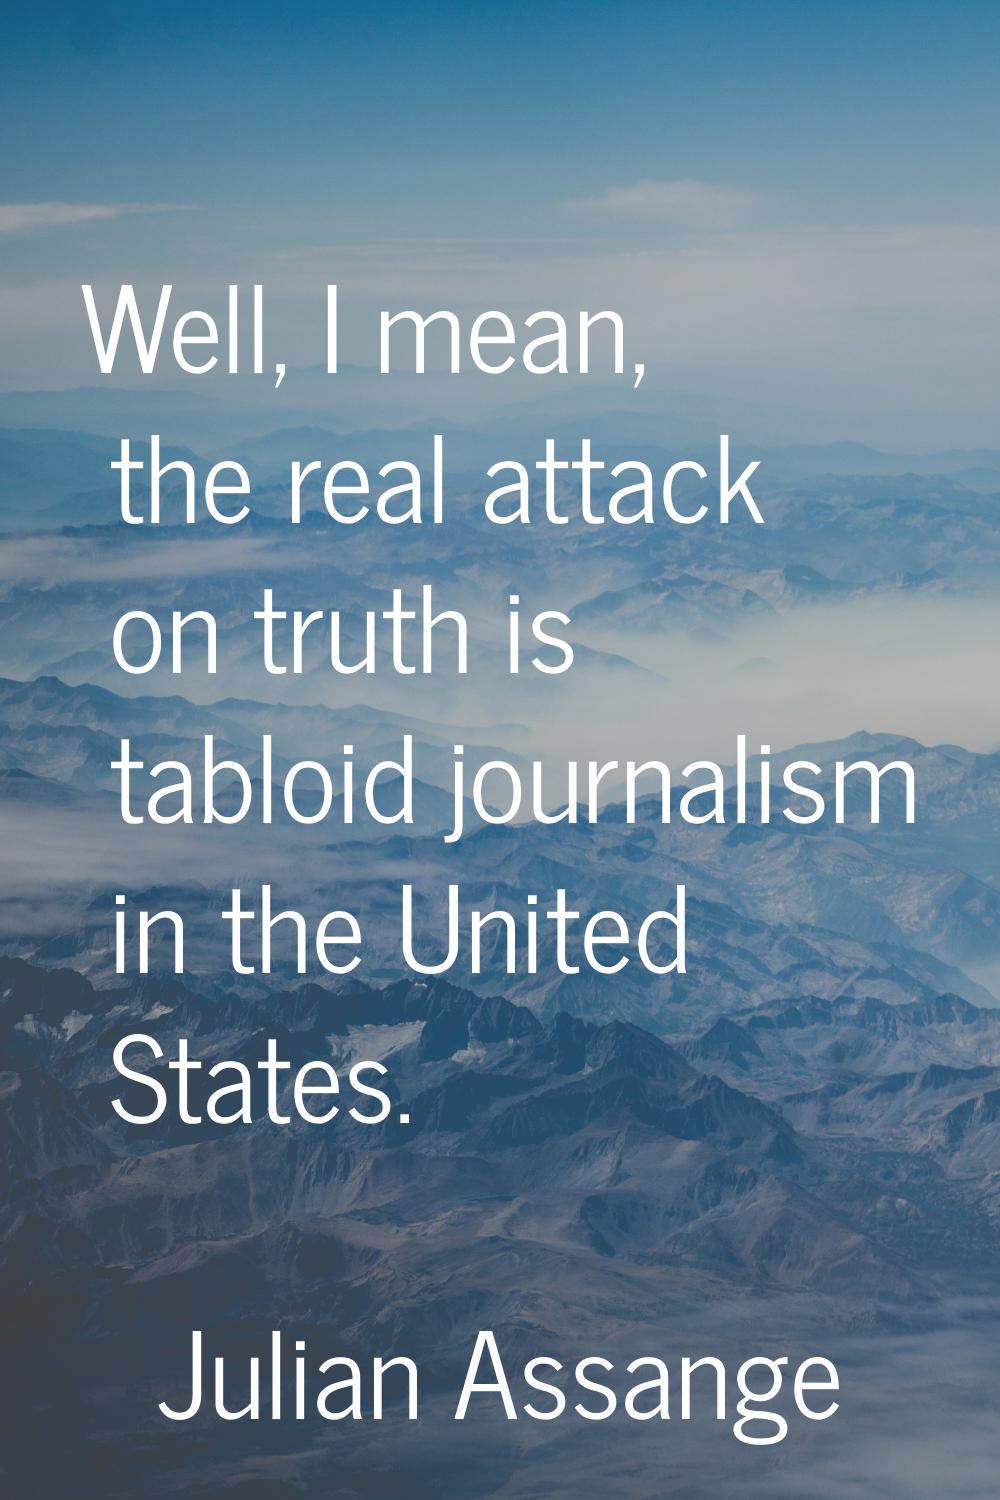 Well, I mean, the real attack on truth is tabloid journalism in the United States.